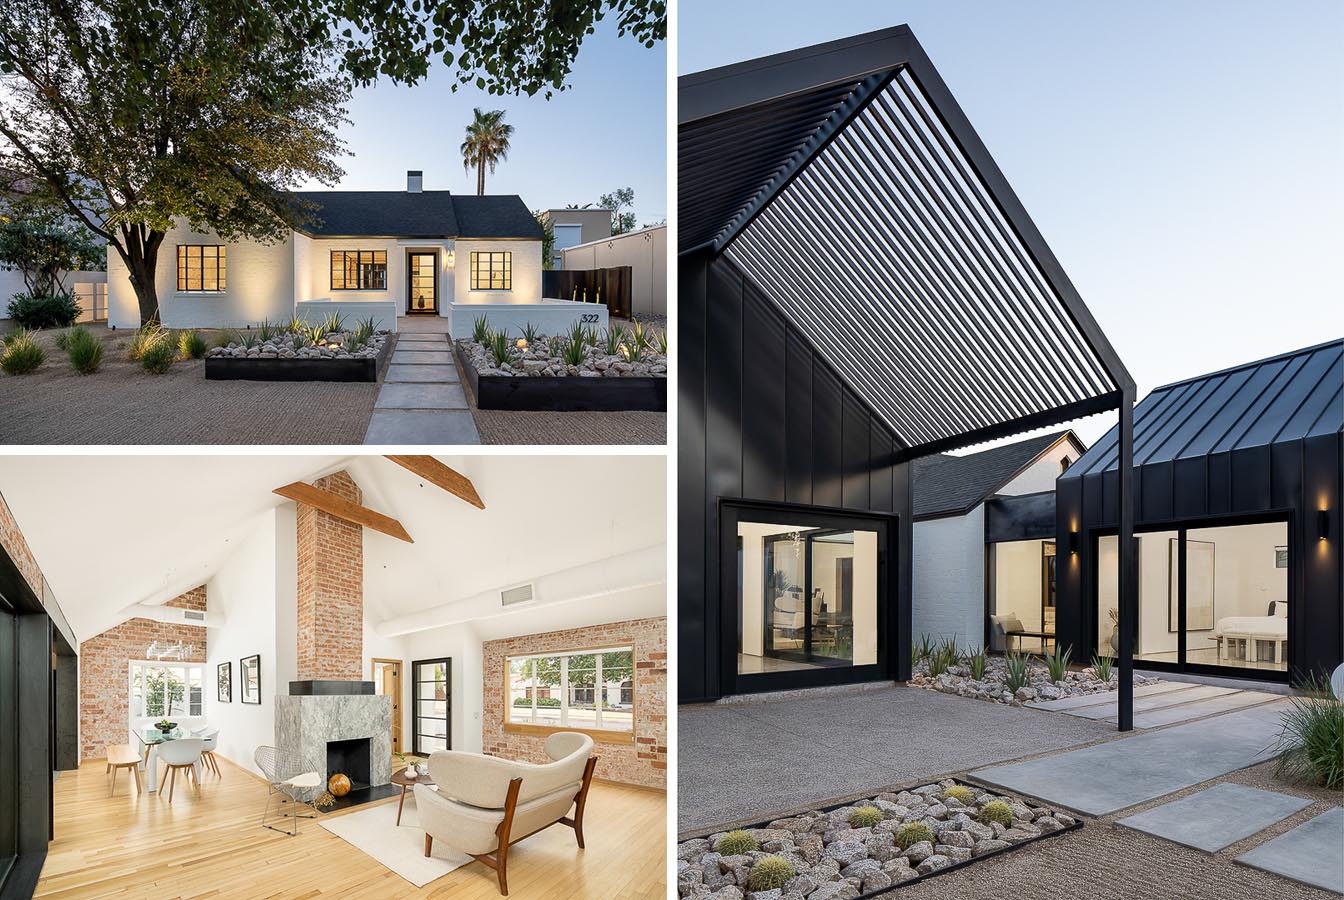 Joel Conteras Design has recently completed the remodel of a 1939 home in the Willo historic neighborhood of Phoenix, Arizona, that included a new rear addition.